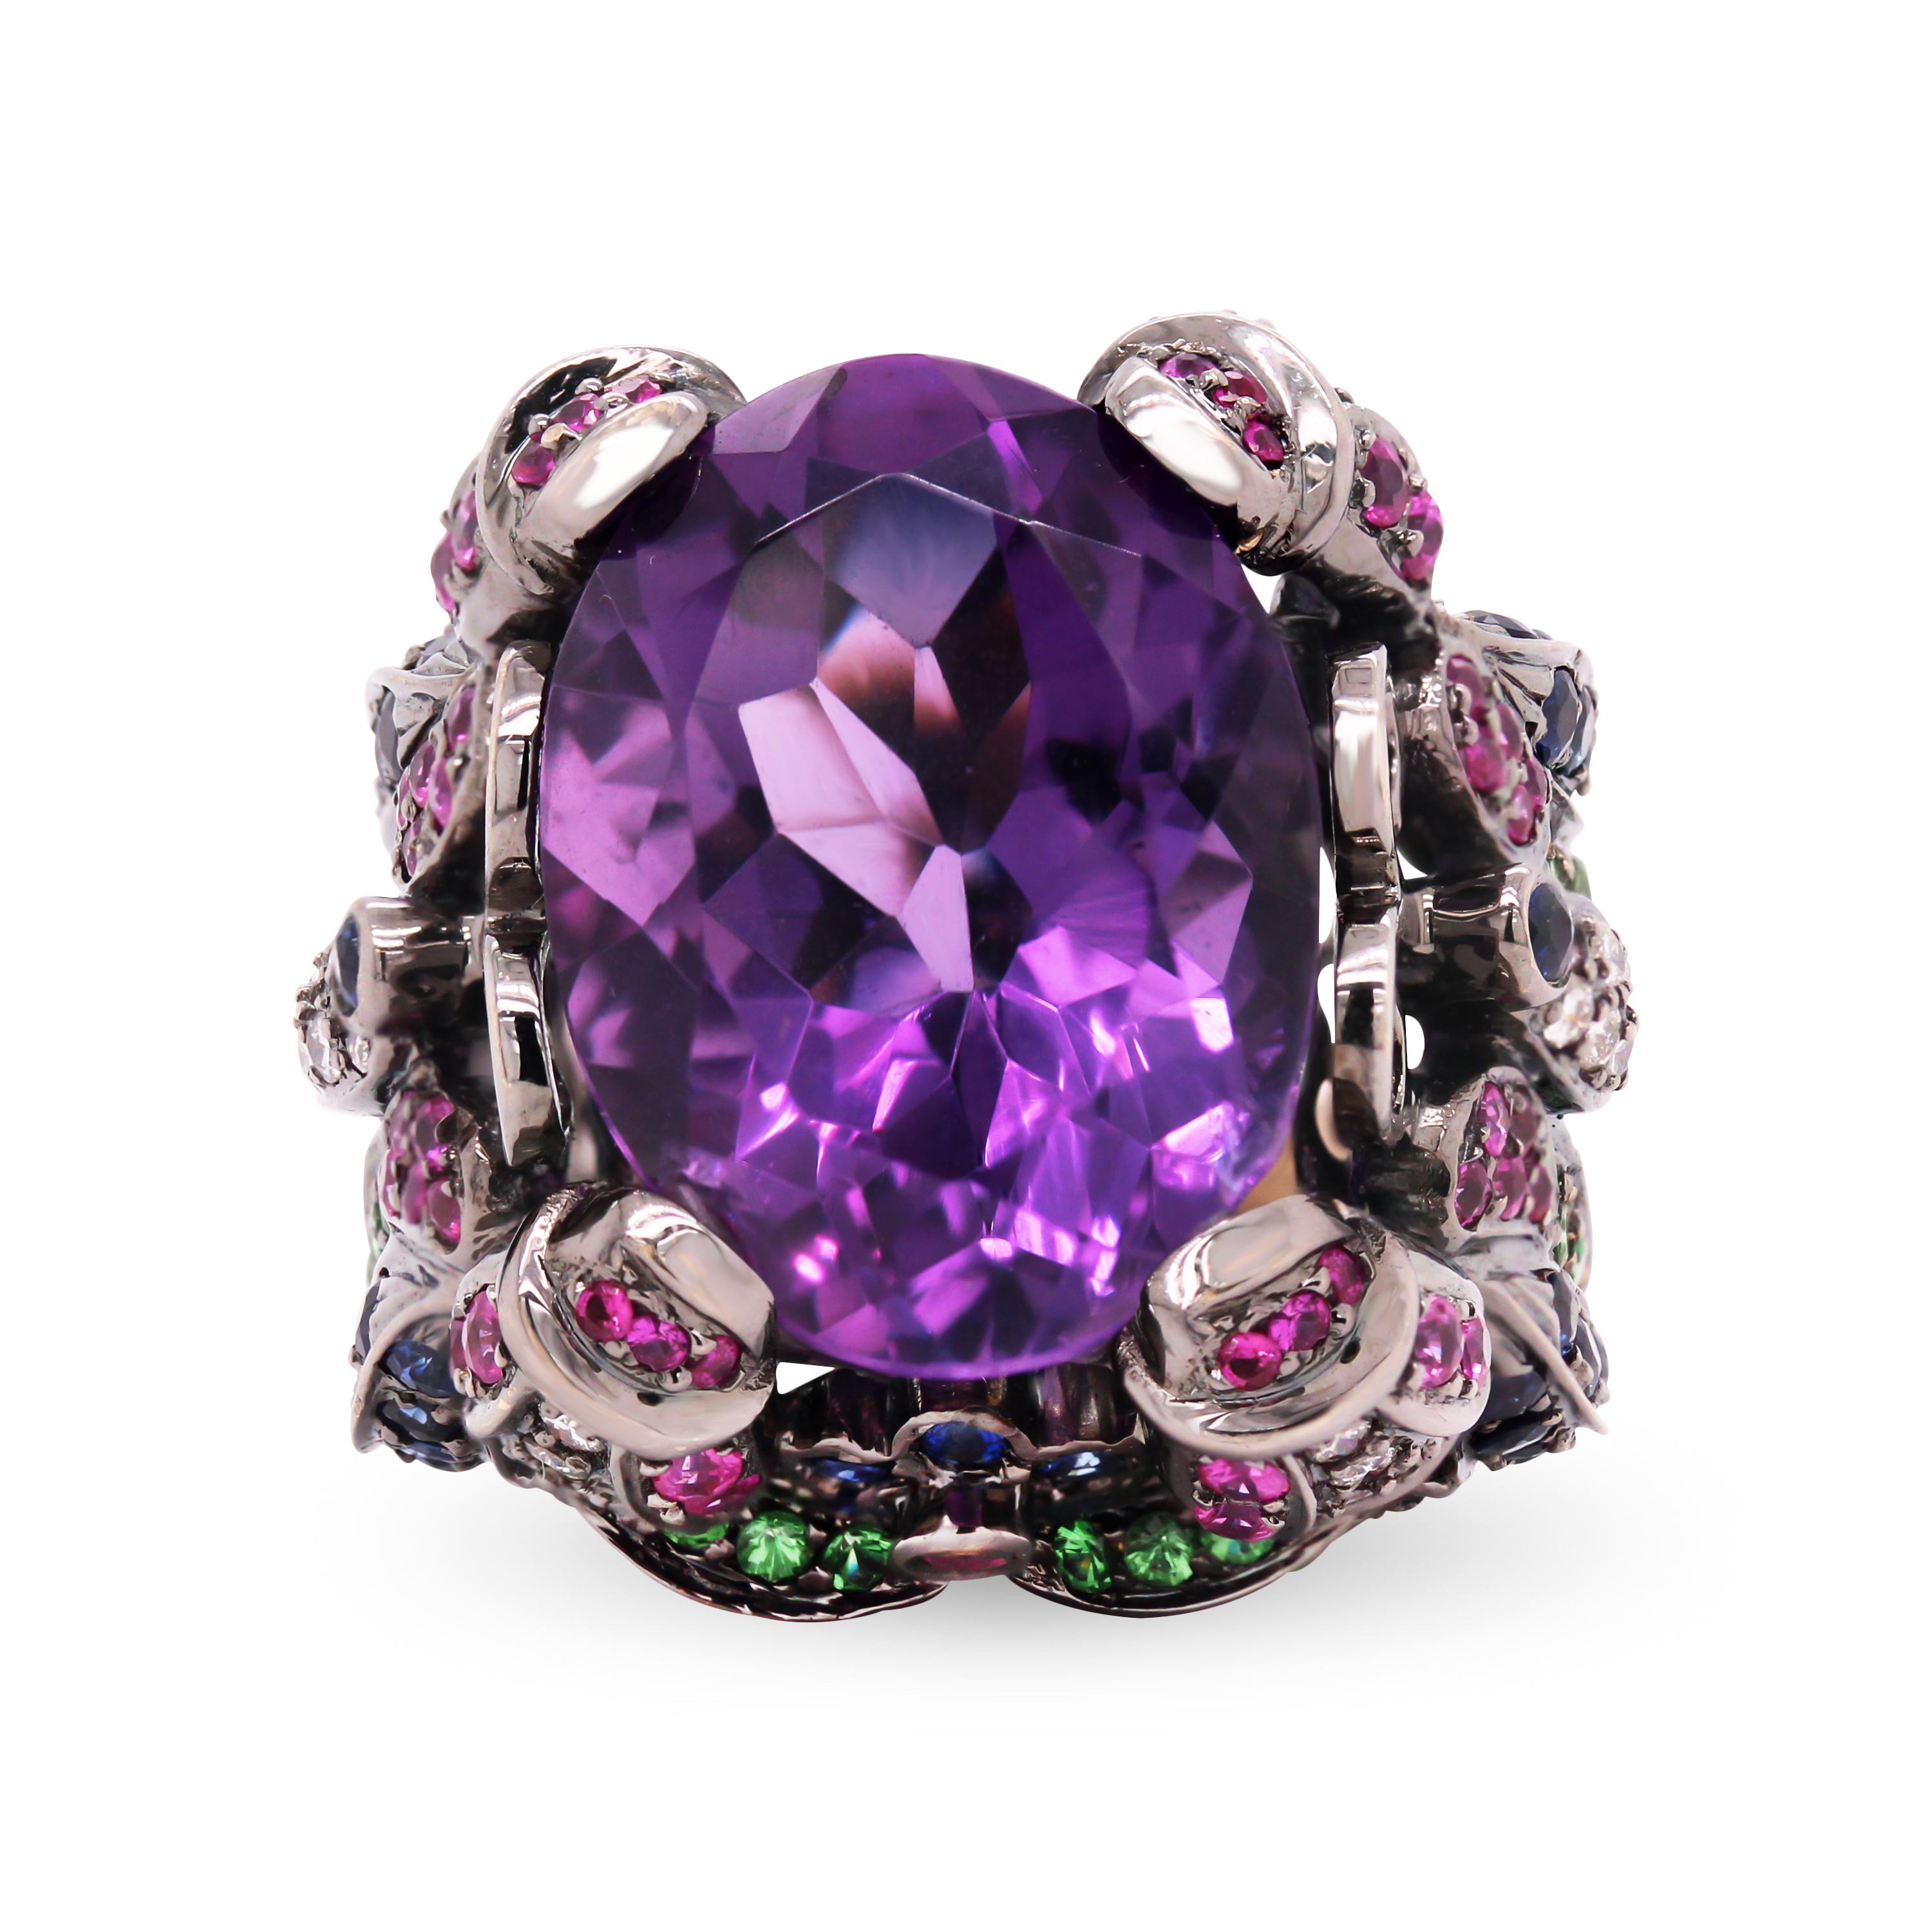 18K Black Gold Oval Amethyst Multi Color Sapphire Floral Motif Cocktail Ring

This gorgeous ring features an oval-cut Amethyst center and has green, blue, pink, white sapphires set all throughout.

Center Amethyst is apprx. 20 carats. 

25mm face